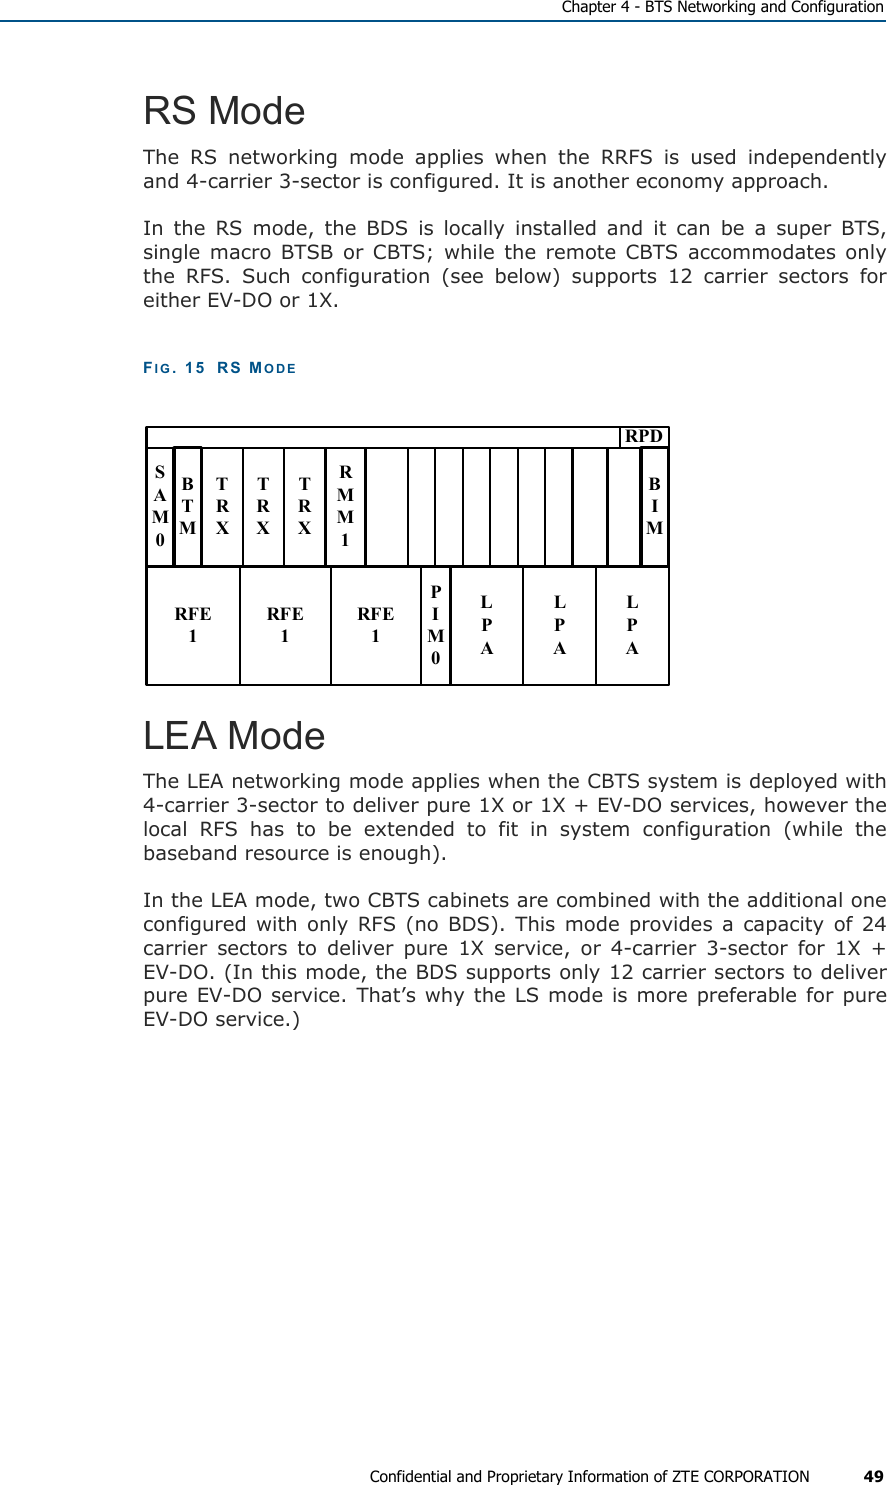   Chapter 4 - BTS Networking and Configuration Confidential and Proprietary Information of ZTE CORPORATION 49 RS Mode The RS networking mode applies when the RRFS is used independently and 4-carrier 3-sector is configured. It is another economy approach.  In the RS mode, the BDS is locally installed and it can be a super BTS, single macro BTSB or CBTS; while the remote CBTS accommodates only the RFS. Such configuration (see below) supports 12 carrier sectors for either EV-DO or 1X.  FIG. 15  RS MODE TRXTRXTRXRMM1RPDSAM0LPAPIM0LPALPARFE1RFE1RFE1BTMBIM LEA Mode The LEA networking mode applies when the CBTS system is deployed with 4-carrier 3-sector to deliver pure 1X or 1X + EV-DO services, however the local RFS has to be extended to fit in system configuration (while the baseband resource is enough).  In the LEA mode, two CBTS cabinets are combined with the additional one configured with only RFS (no BDS). This mode provides a capacity of 24 carrier sectors to deliver pure 1X service, or 4-carrier 3-sector for 1X + EV-DO. (In this mode, the BDS supports only 12 carrier sectors to deliver pure EV-DO service. That’s why the LS mode is more preferable for pure EV-DO service.) 